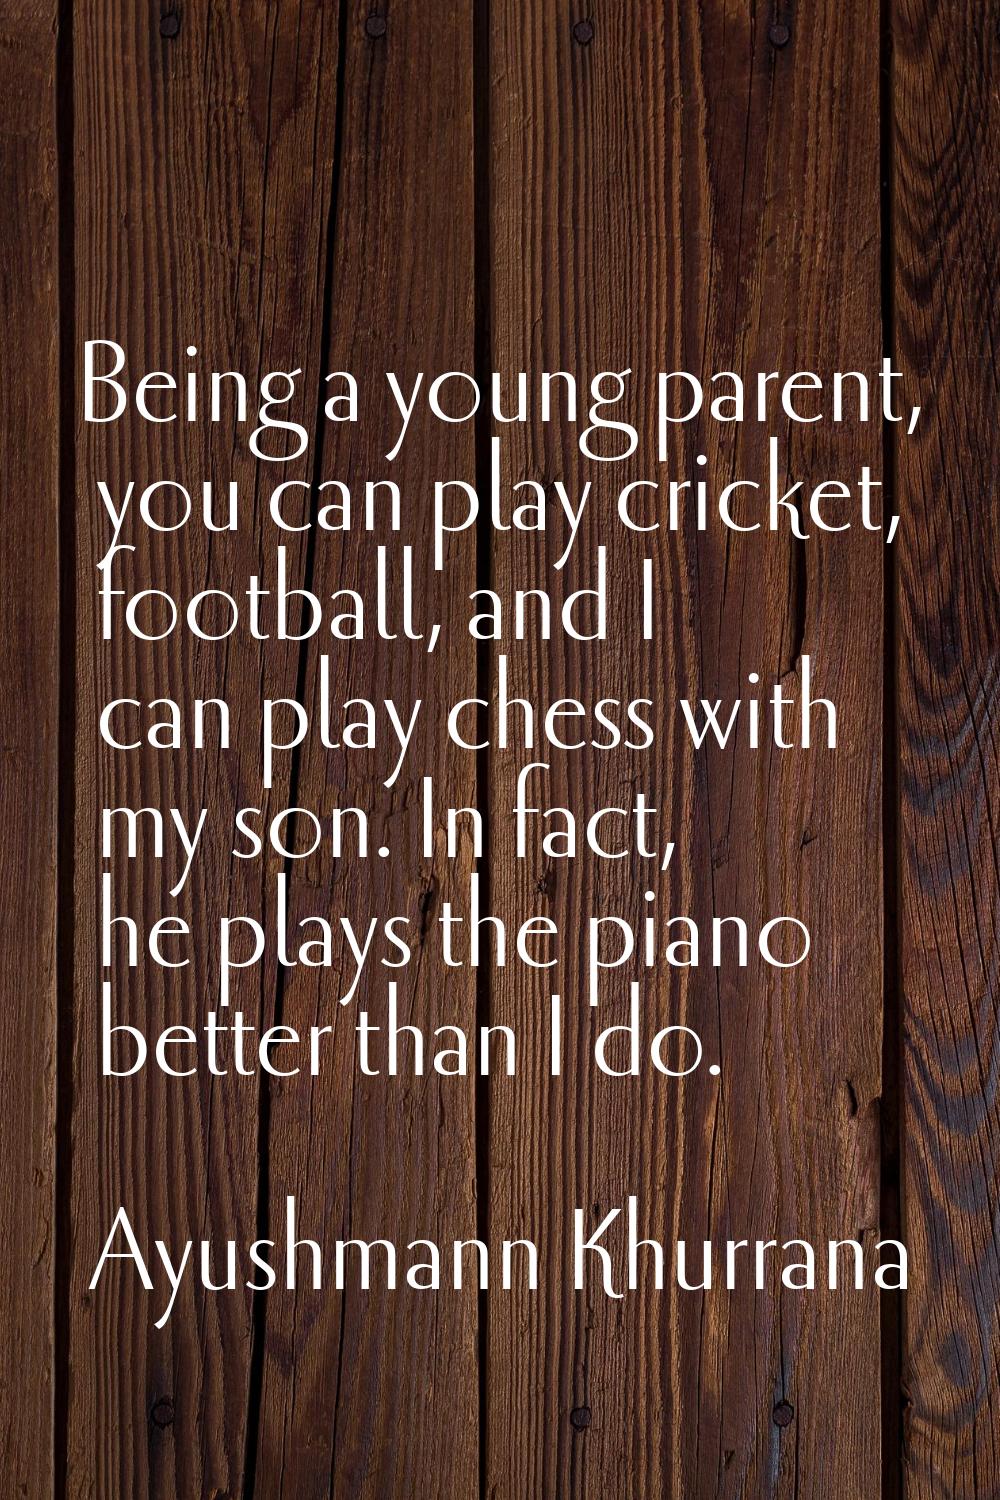 Being a young parent, you can play cricket, football, and I can play chess with my son. In fact, he